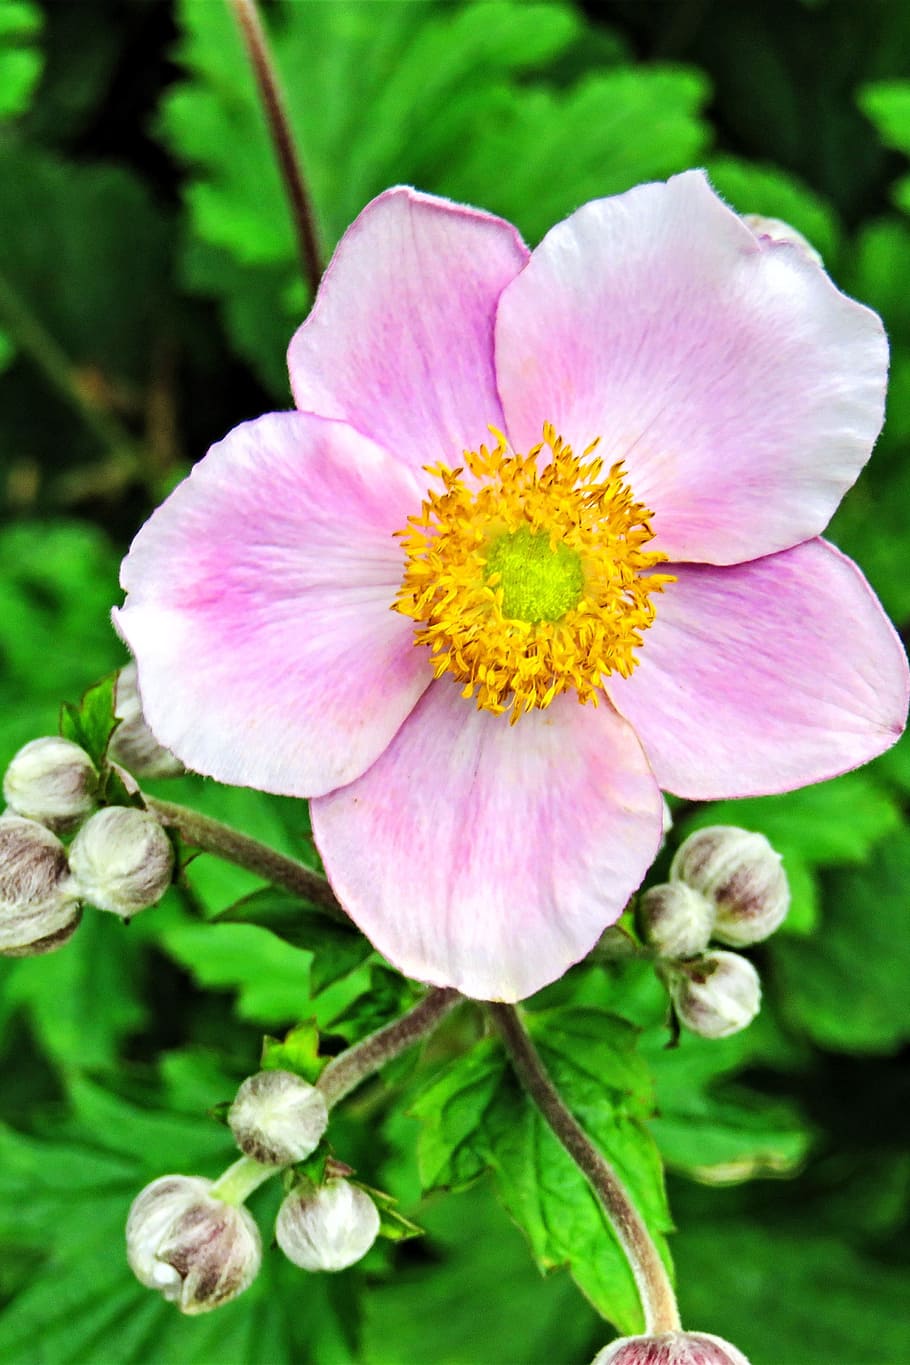 plant, fall anemone, japanese anemone, flower, blossom, bloom, bud, pink petals, yellow pollen tubes, garden